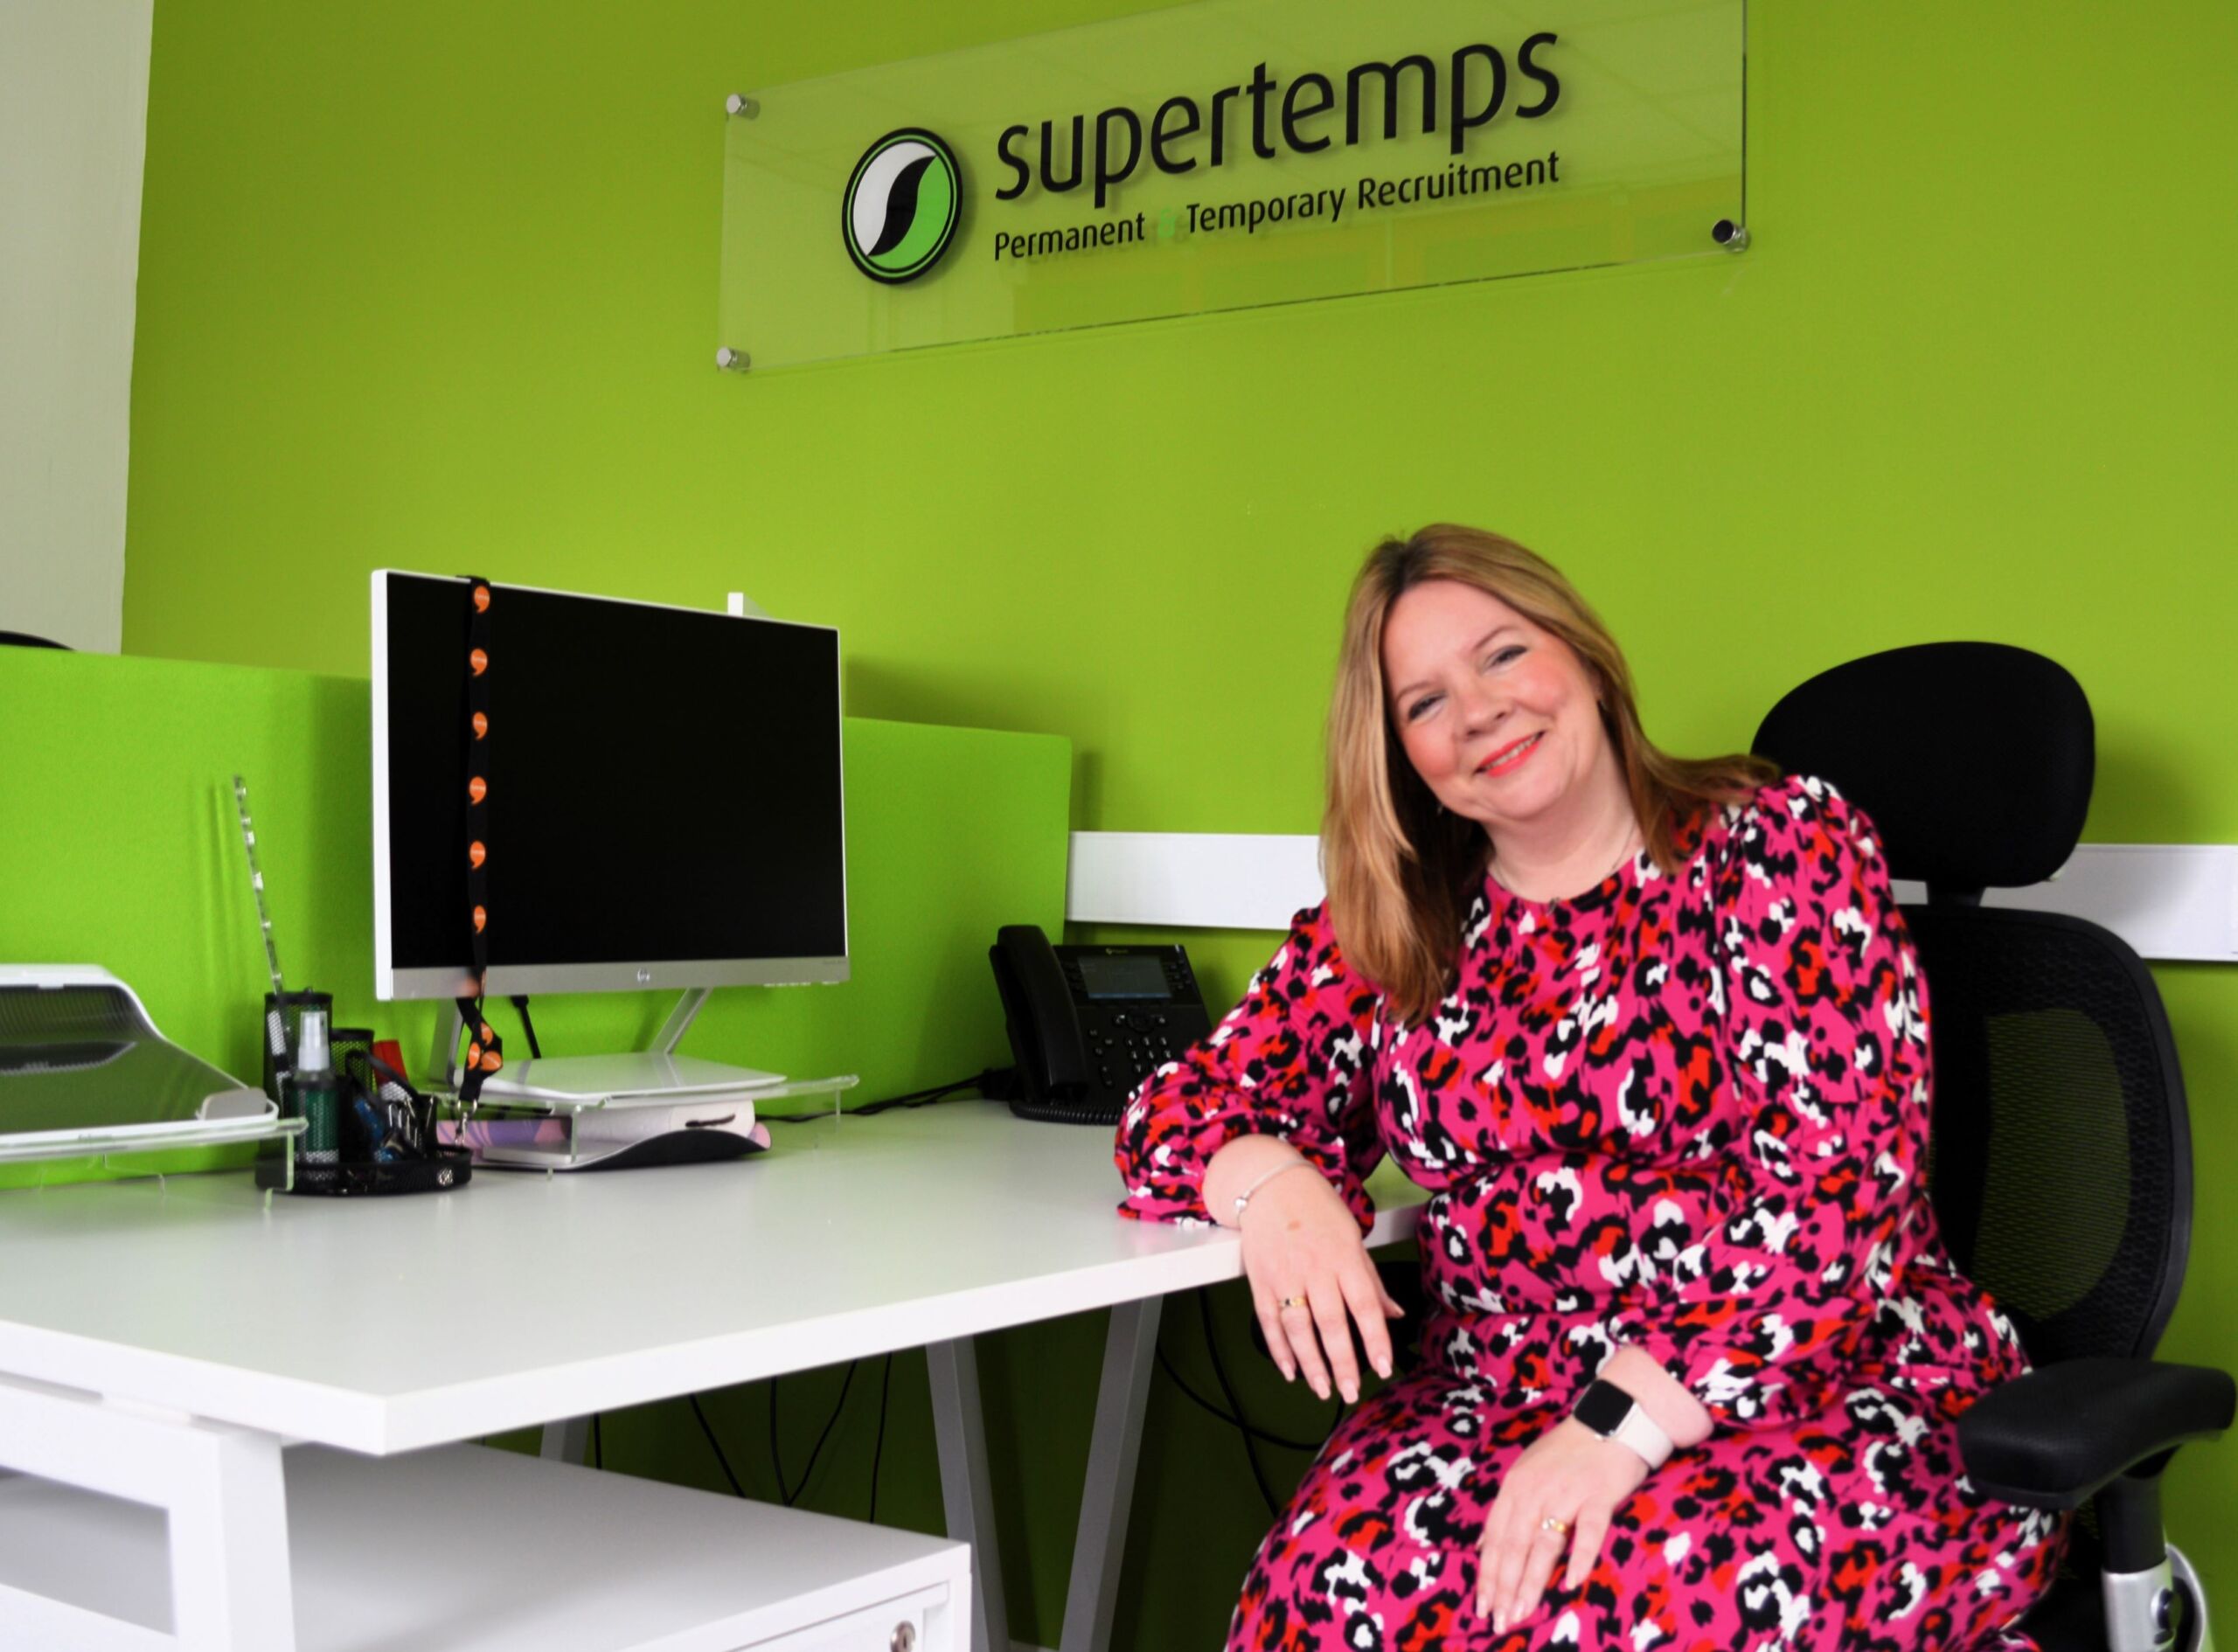 Boom in clients and candidates as recruiter approaches 45 years in business